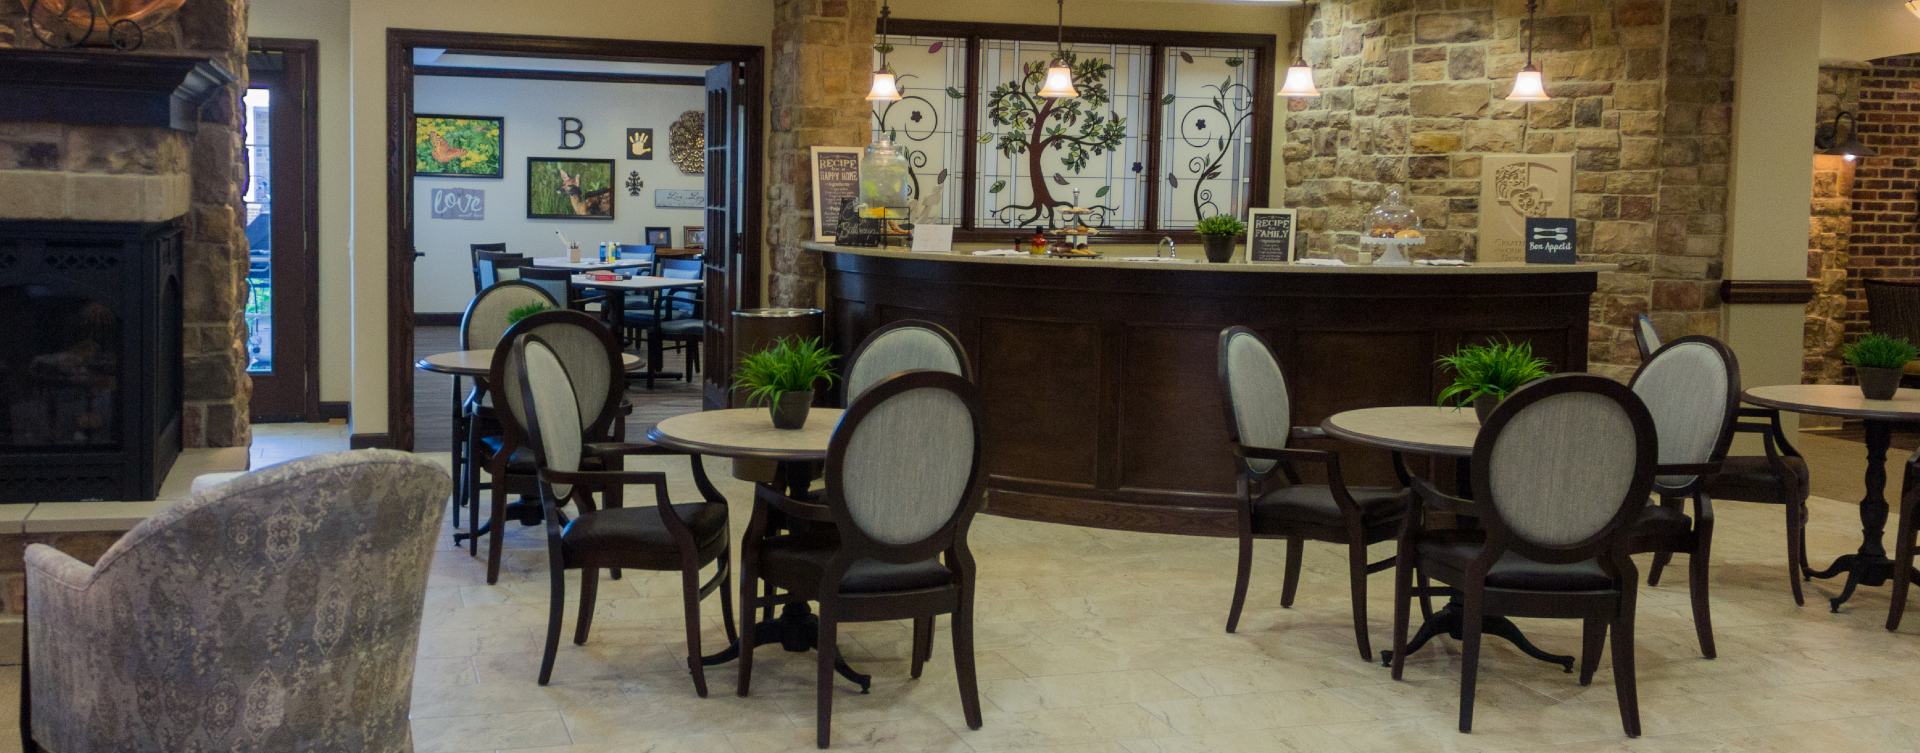 Mingle and converse with old and new friends alike in the bistro at Bickford of Suffolk